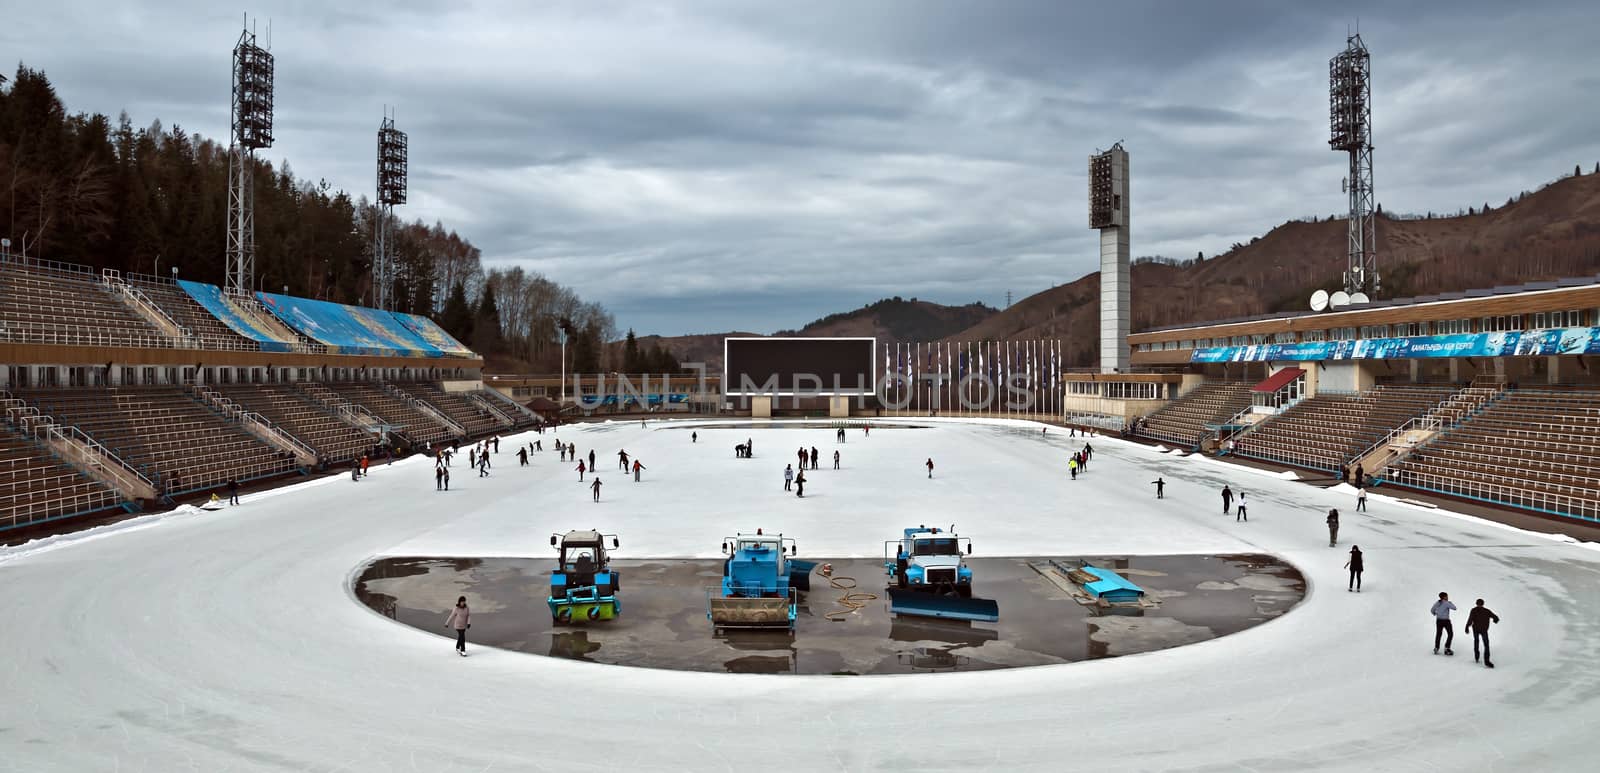 ALMATY, KAZAKHSTAN - NOVEMBER 4, 2014: View of Medeo outdoor stadium. Medeo is located on 1691 meters above sea level. 

Almaty, Kazakhstan - November 4, 2014: View of Medeo outdoor stadium. Medeo is located on 1691 meters above sea level. People are skating.